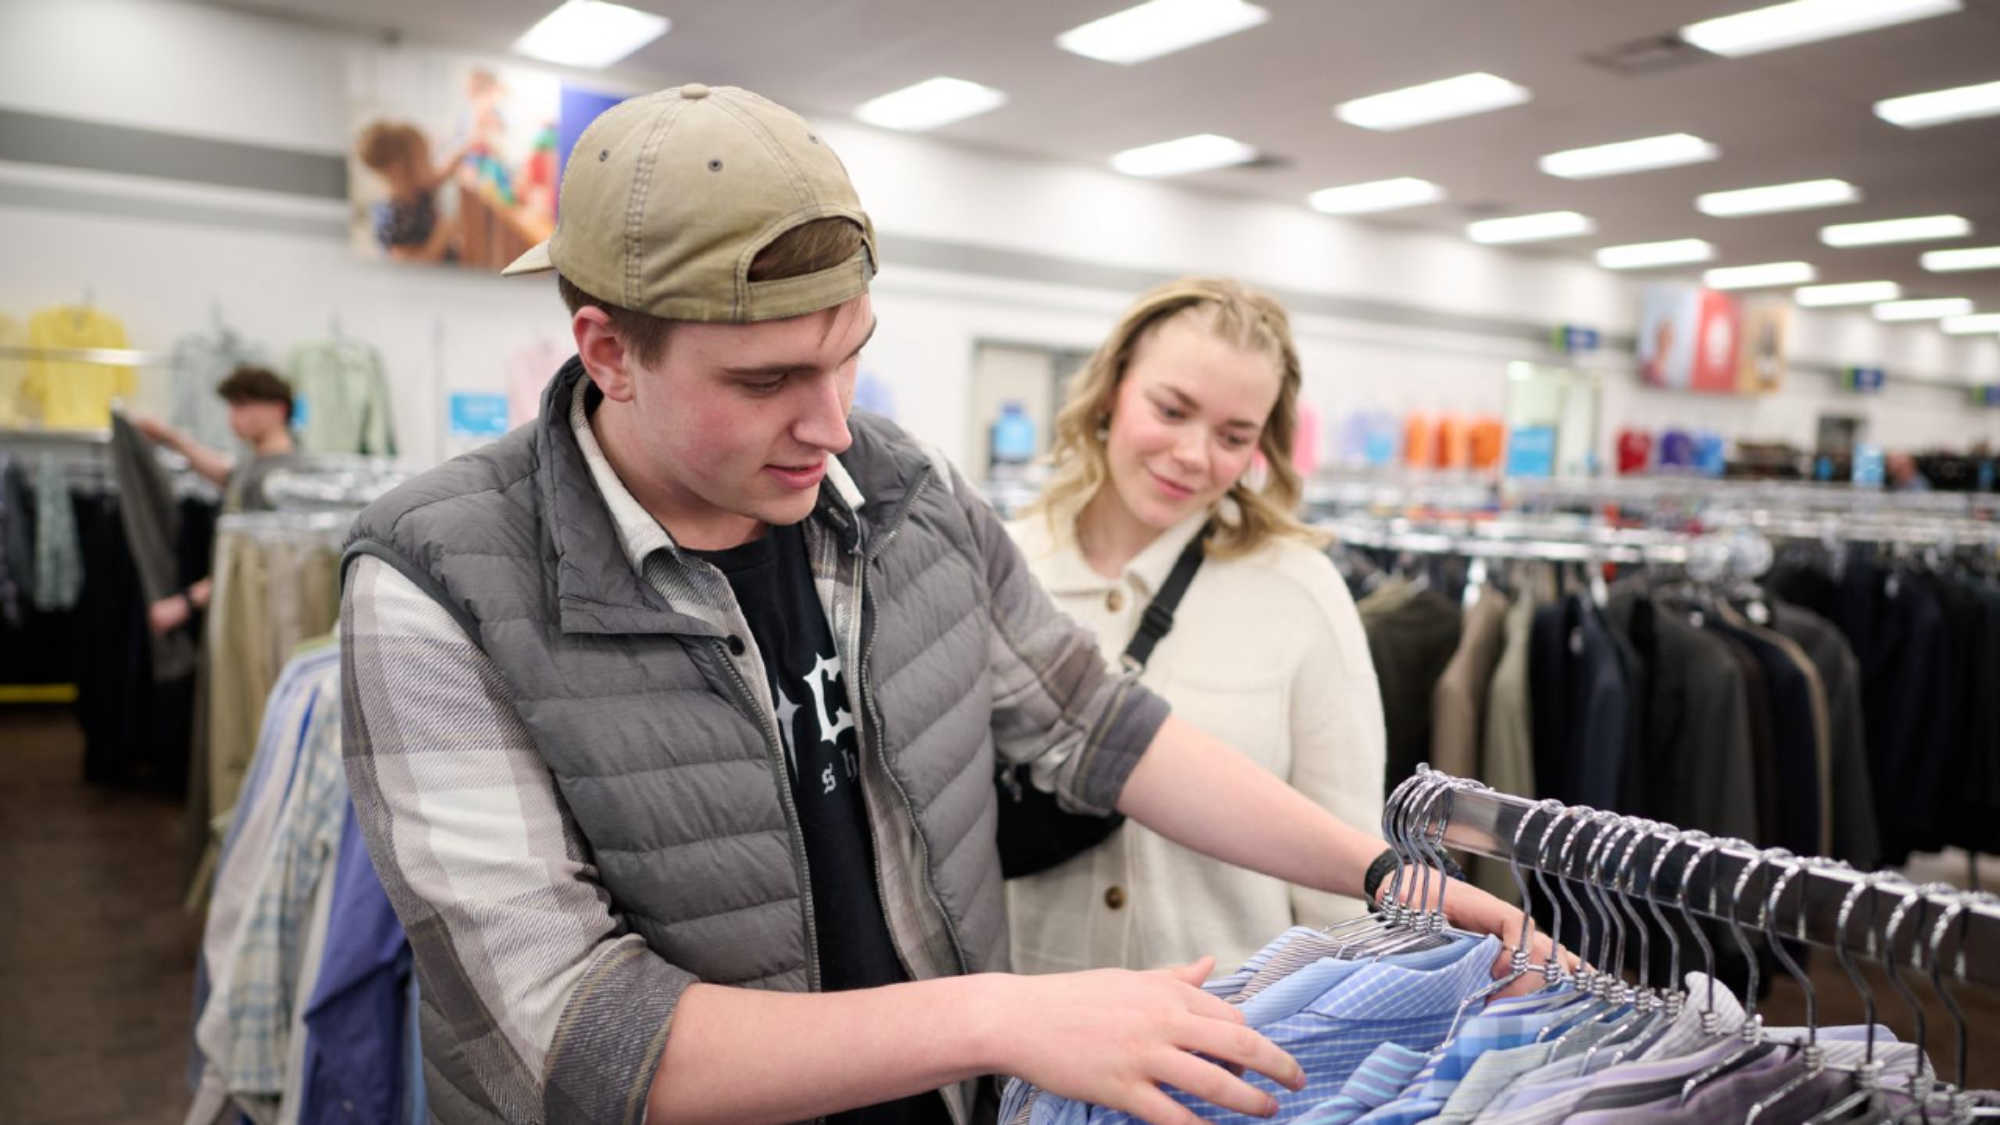 A young man and a young woman browsing the clothing racks at their local DI